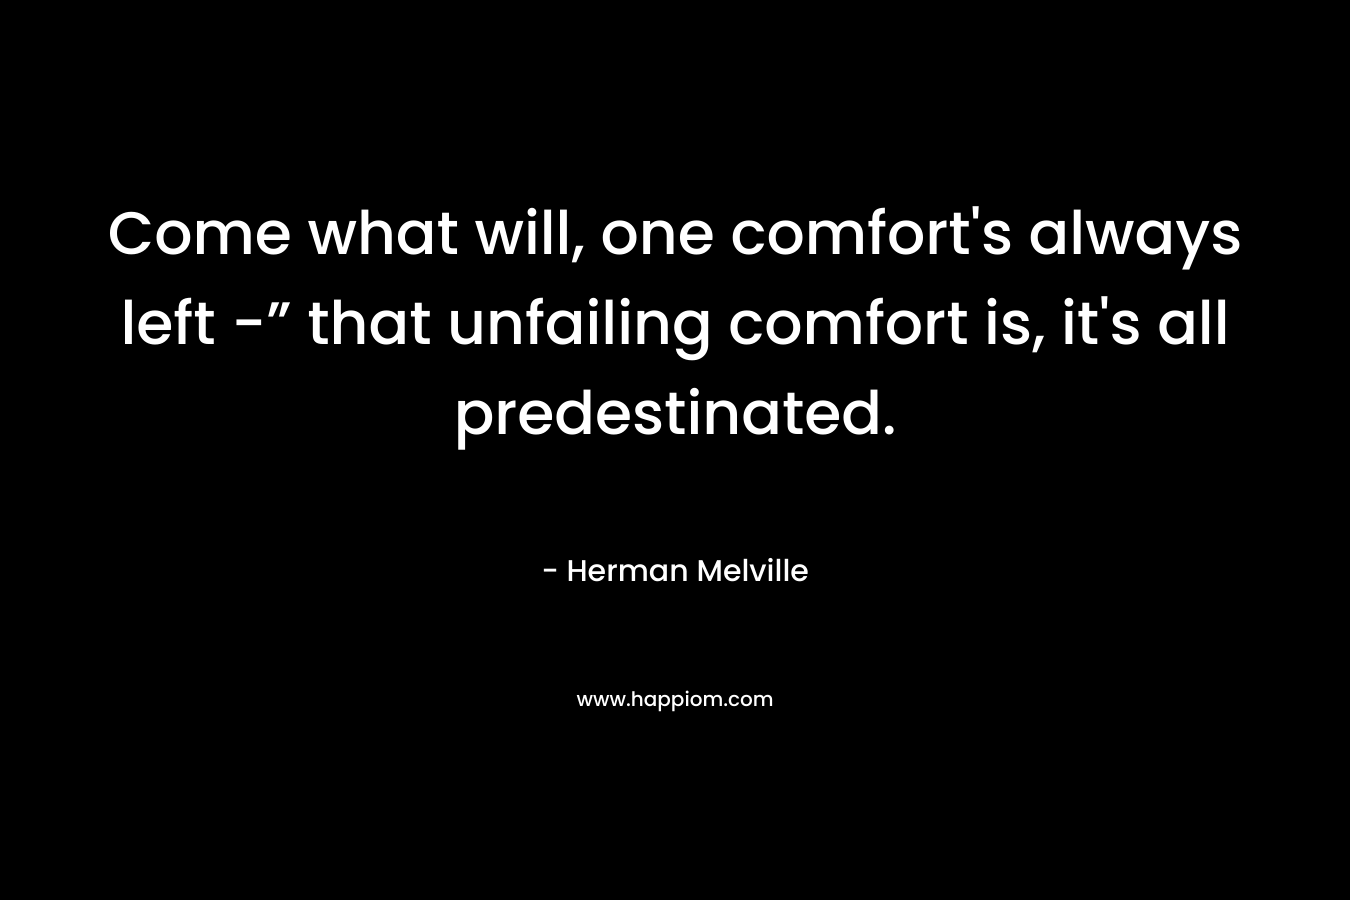 Come what will, one comfort’s always left -” that unfailing comfort is, it’s all predestinated. – Herman Melville